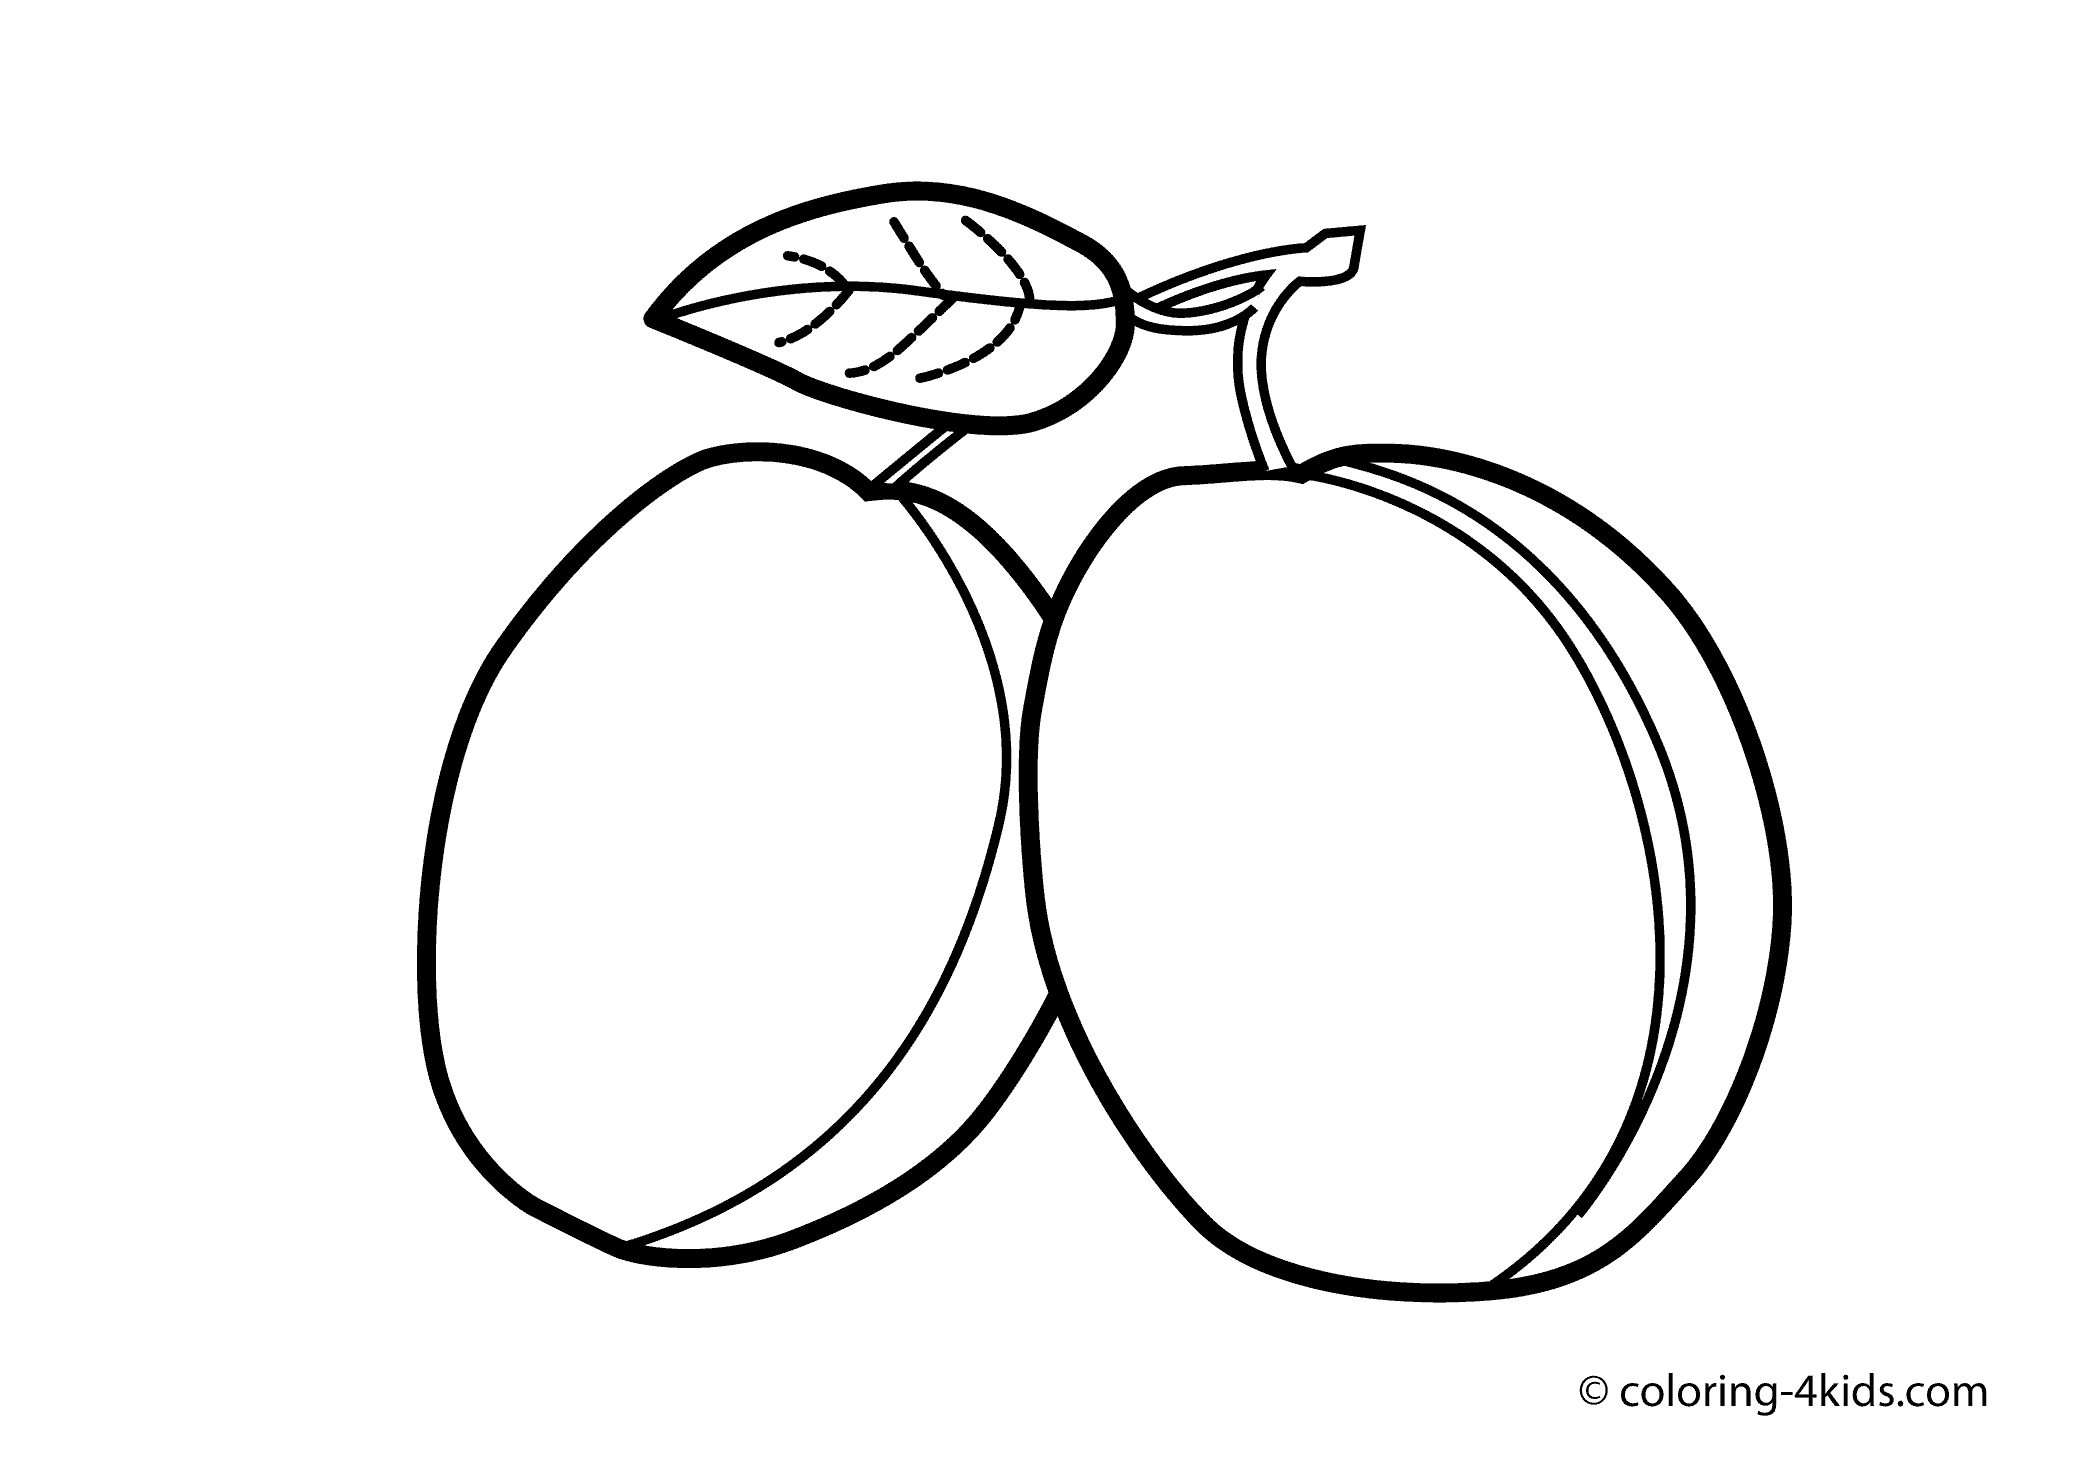 Plum - Fruits coloring pages for kids, prinables | Fruit coloring ...